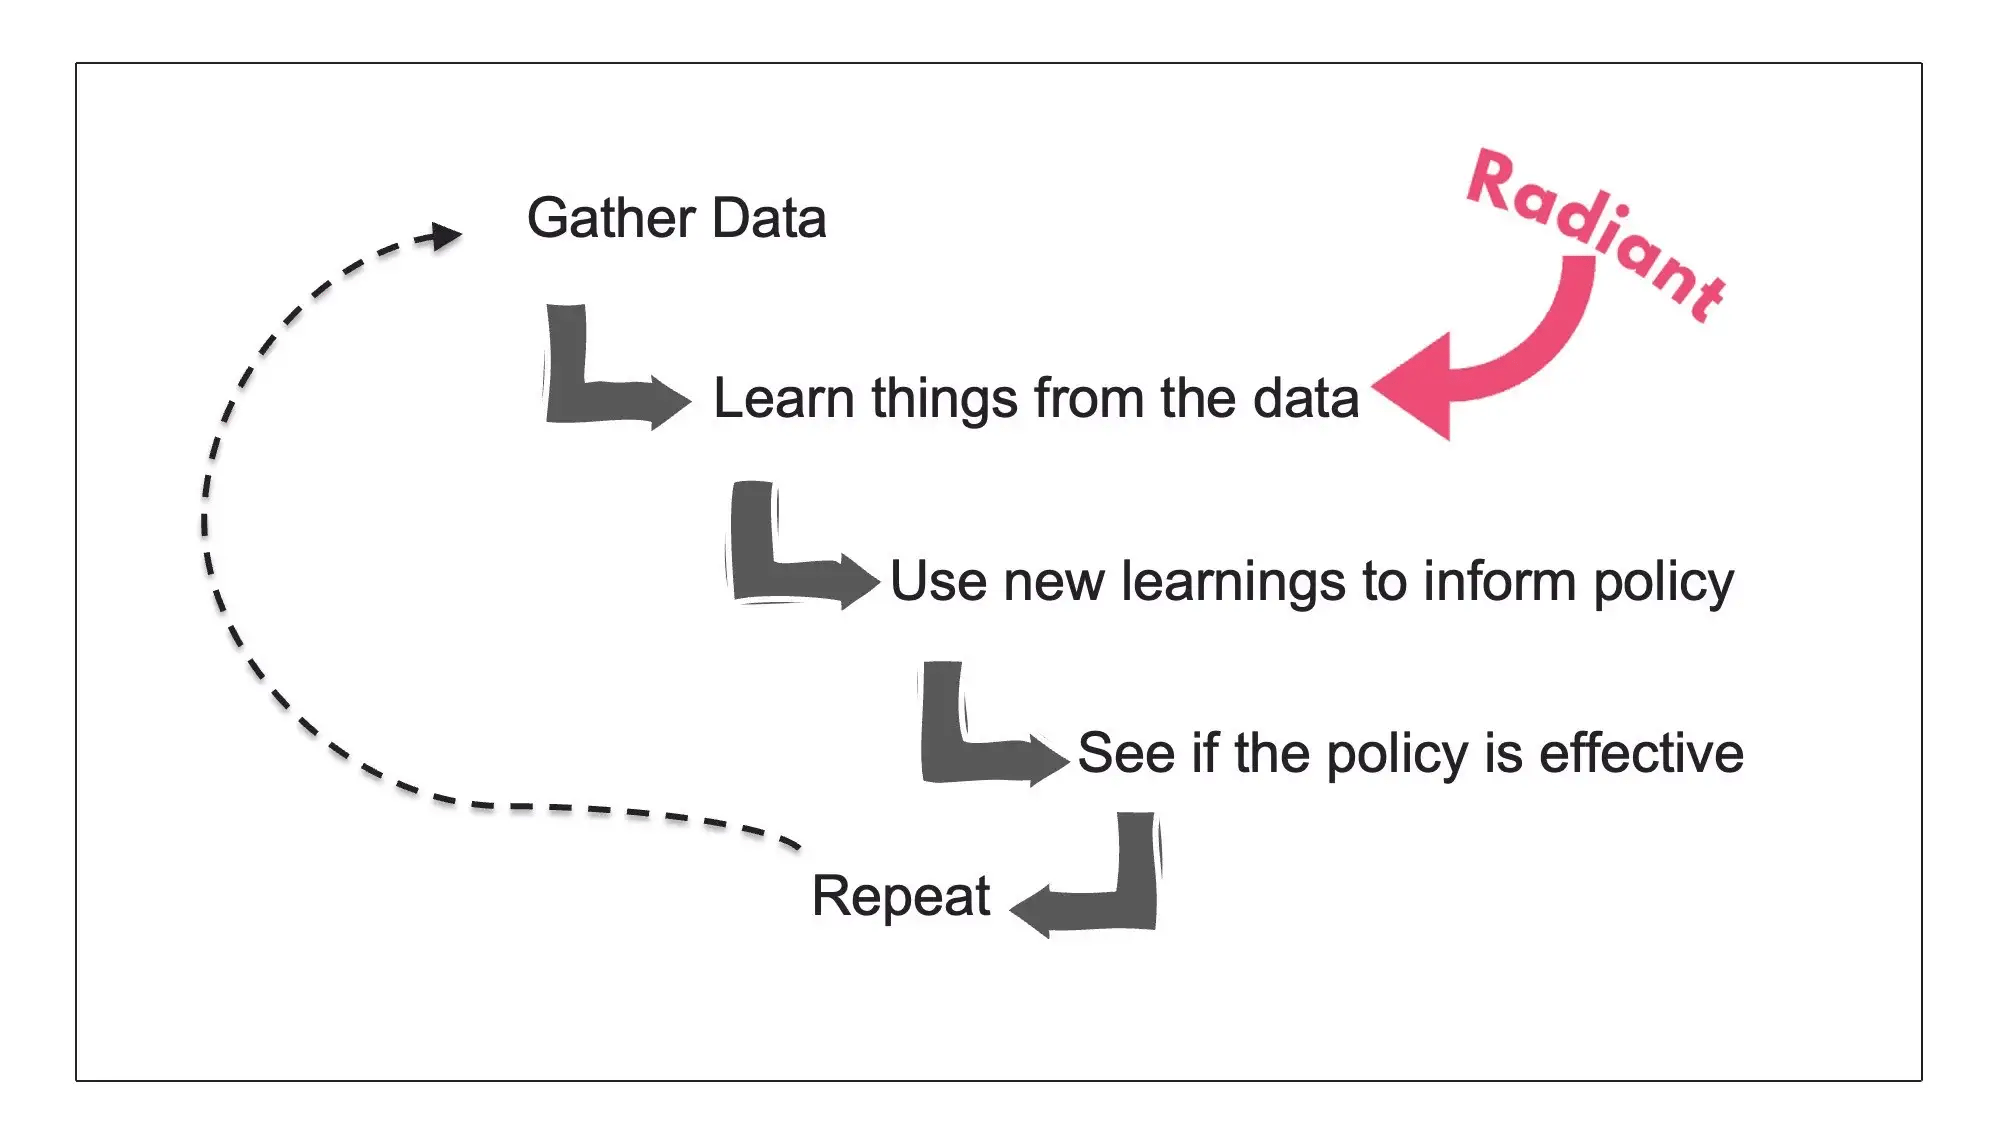 A visualization of text showing Gather data → learn things from the data → use new learnings to inform policy → see if the policy is effective → repeat